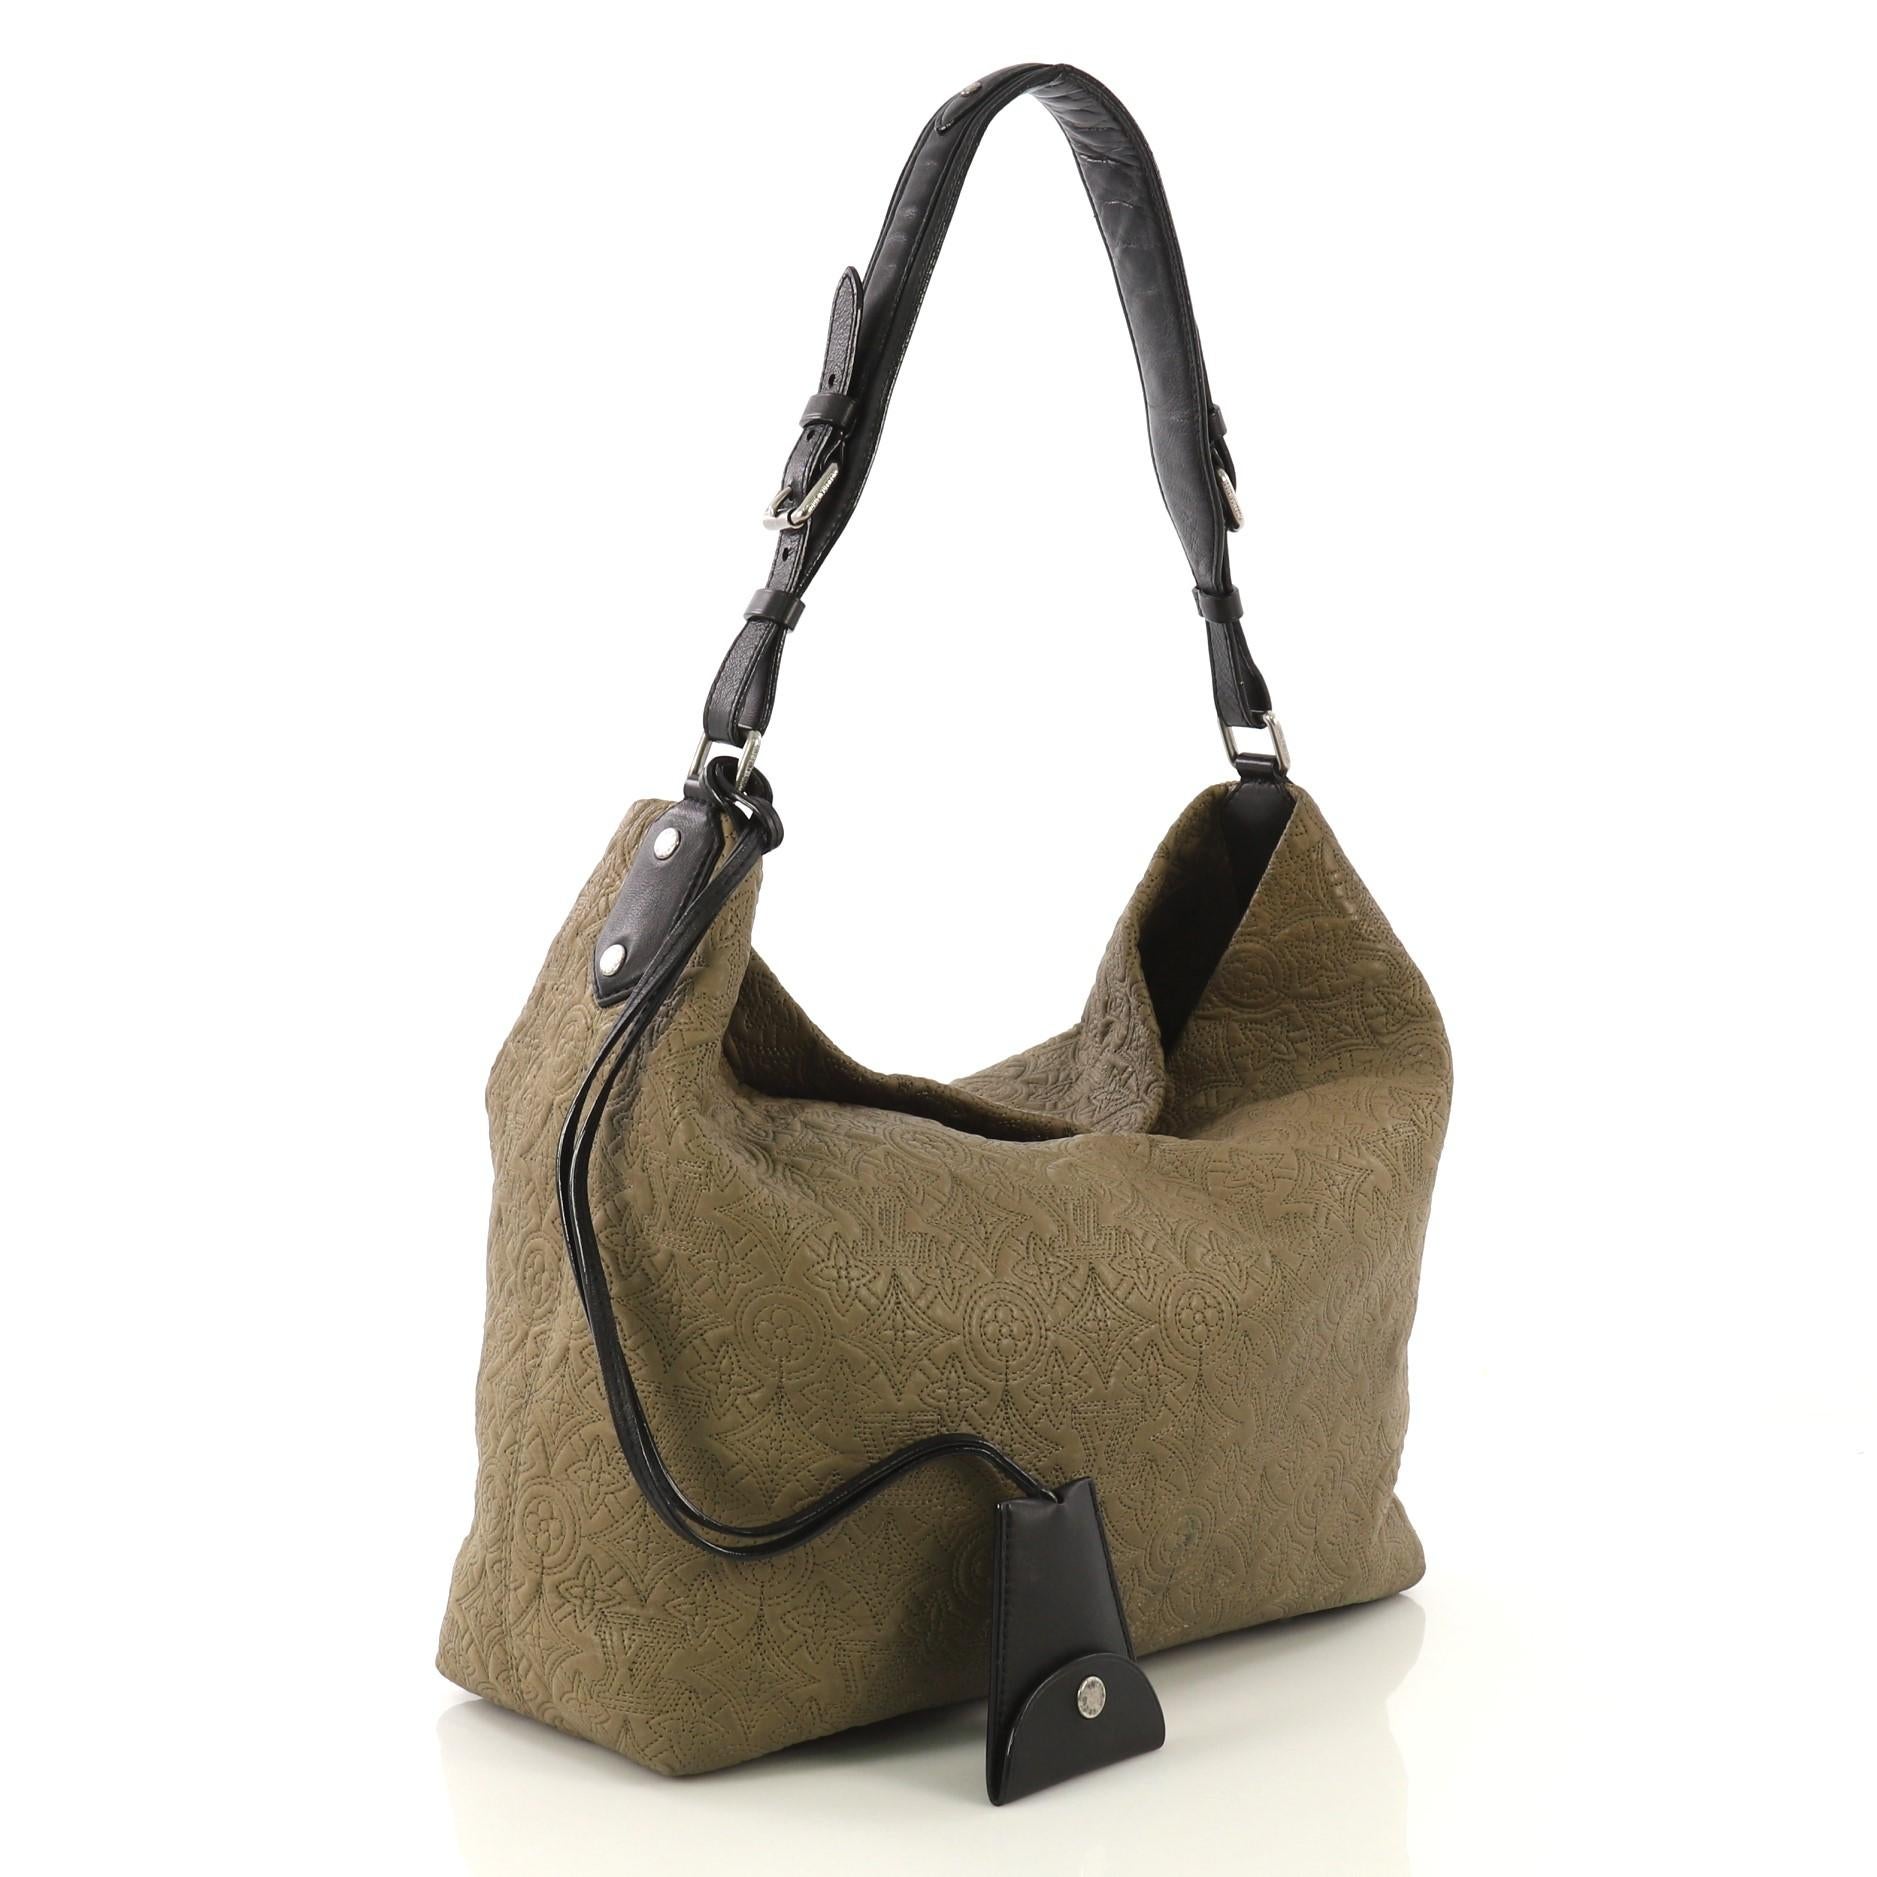 This Louis Vuitton Antheia Hobo Leather PM, crafted from green leather, features a leather top handle, monogram flower embossed stitching, and aged silver-tone hardware. It opens to a gray microfiber interior with zip and slip pockets. Authenticity